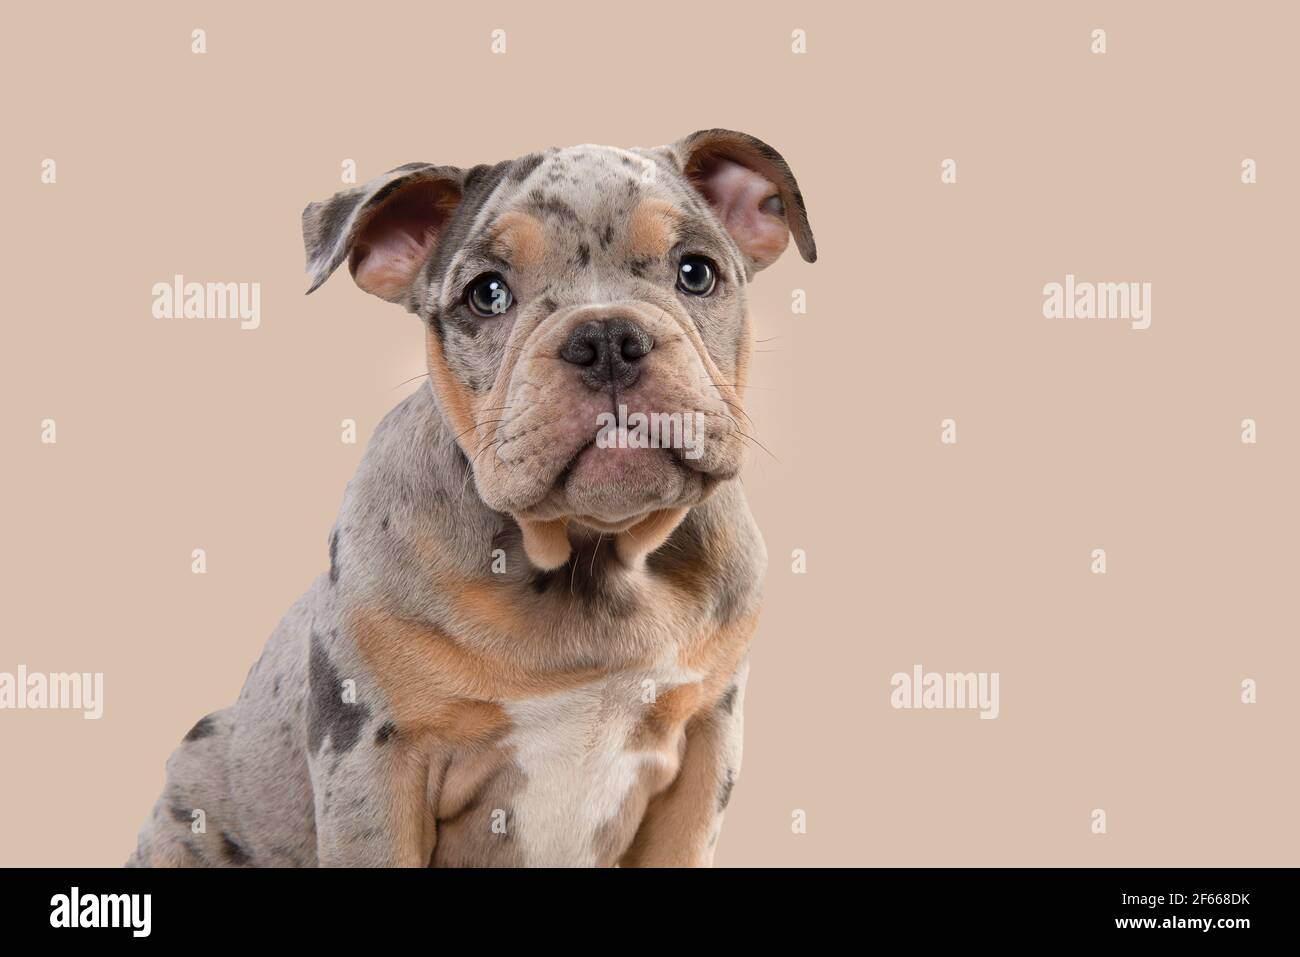 Portrait of a cute old english bulldog puppy looking at the camera on a cream white background Stock Photo